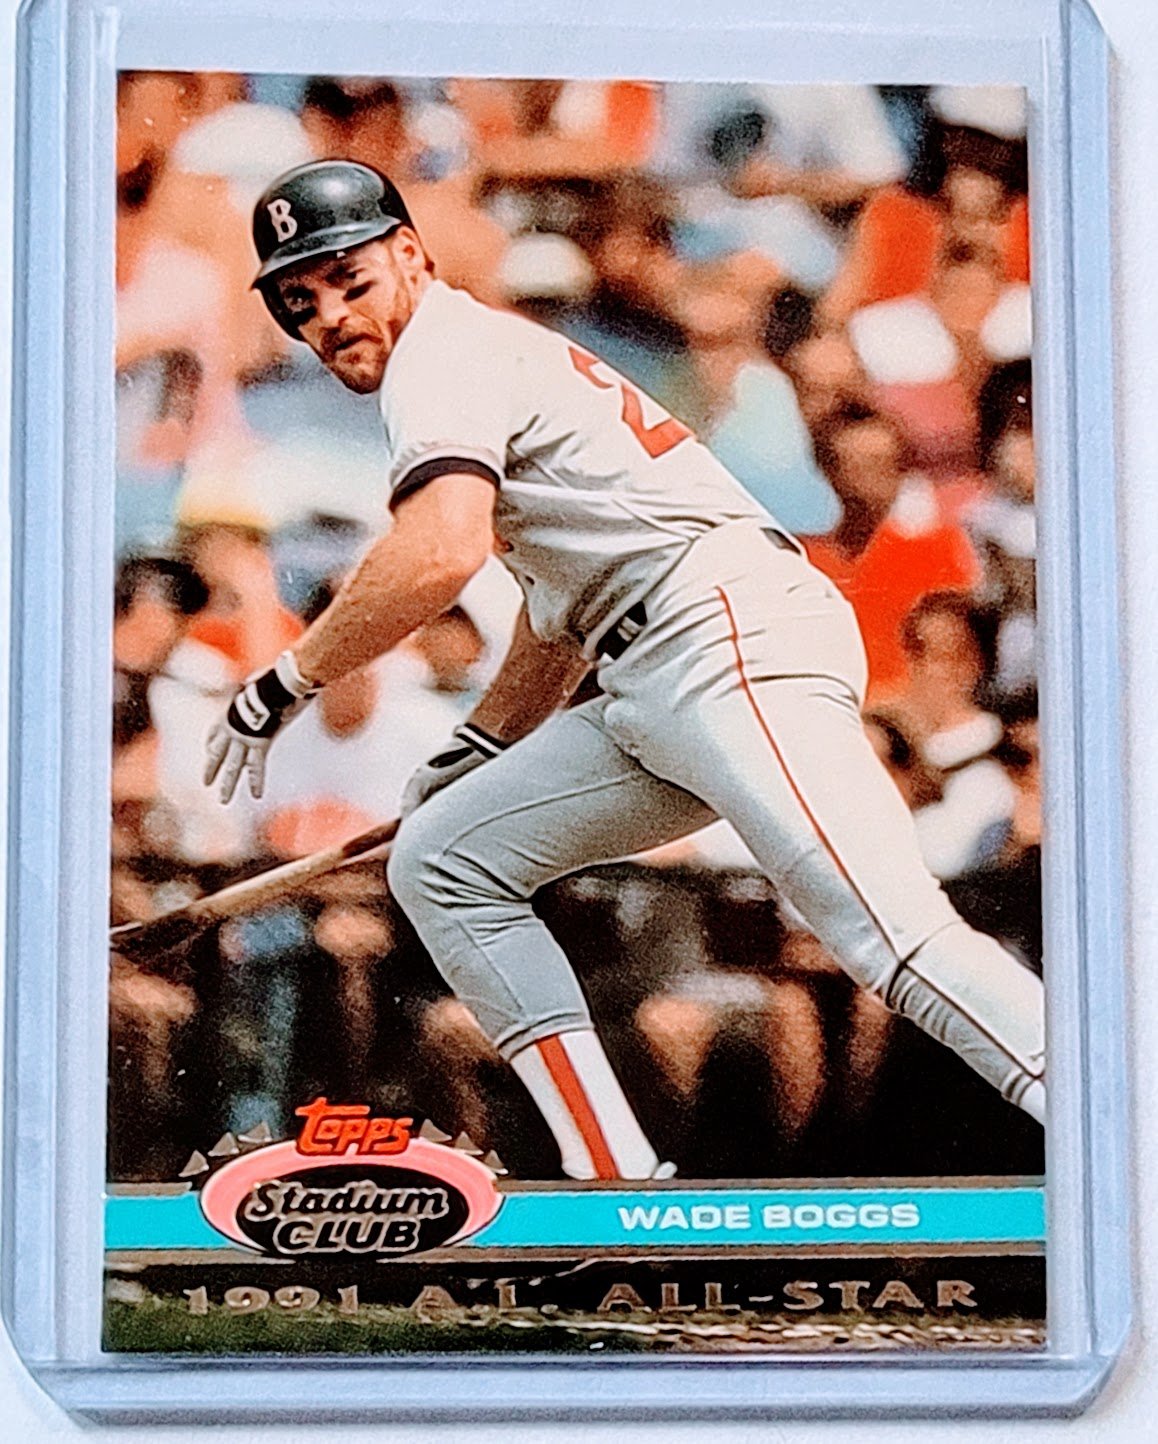 1992 Topps Stadium Club Dome Wade Boggs 1991 All Star MLB Baseball Trading Card TPTV simple Xclusive Collectibles   